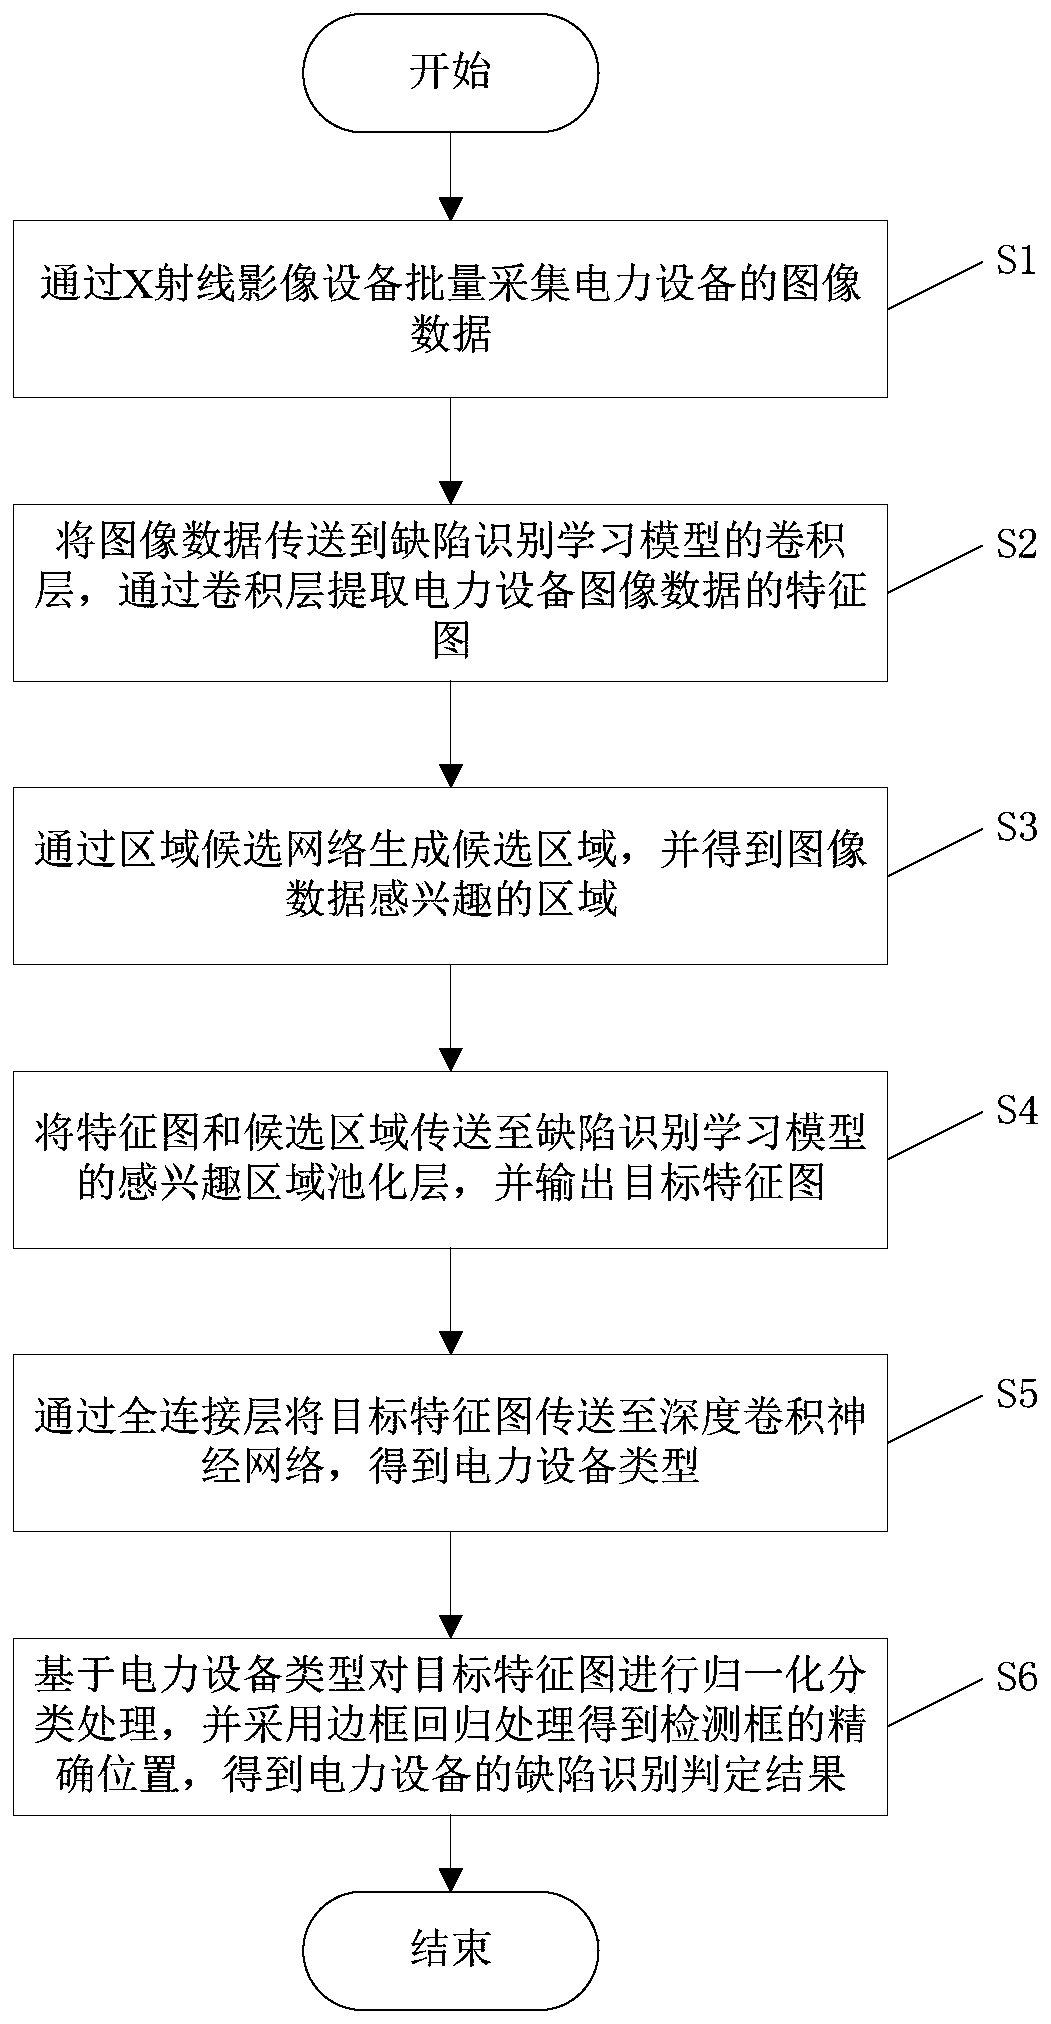 Defect recognition method based on a power equipment defect recognition learning model